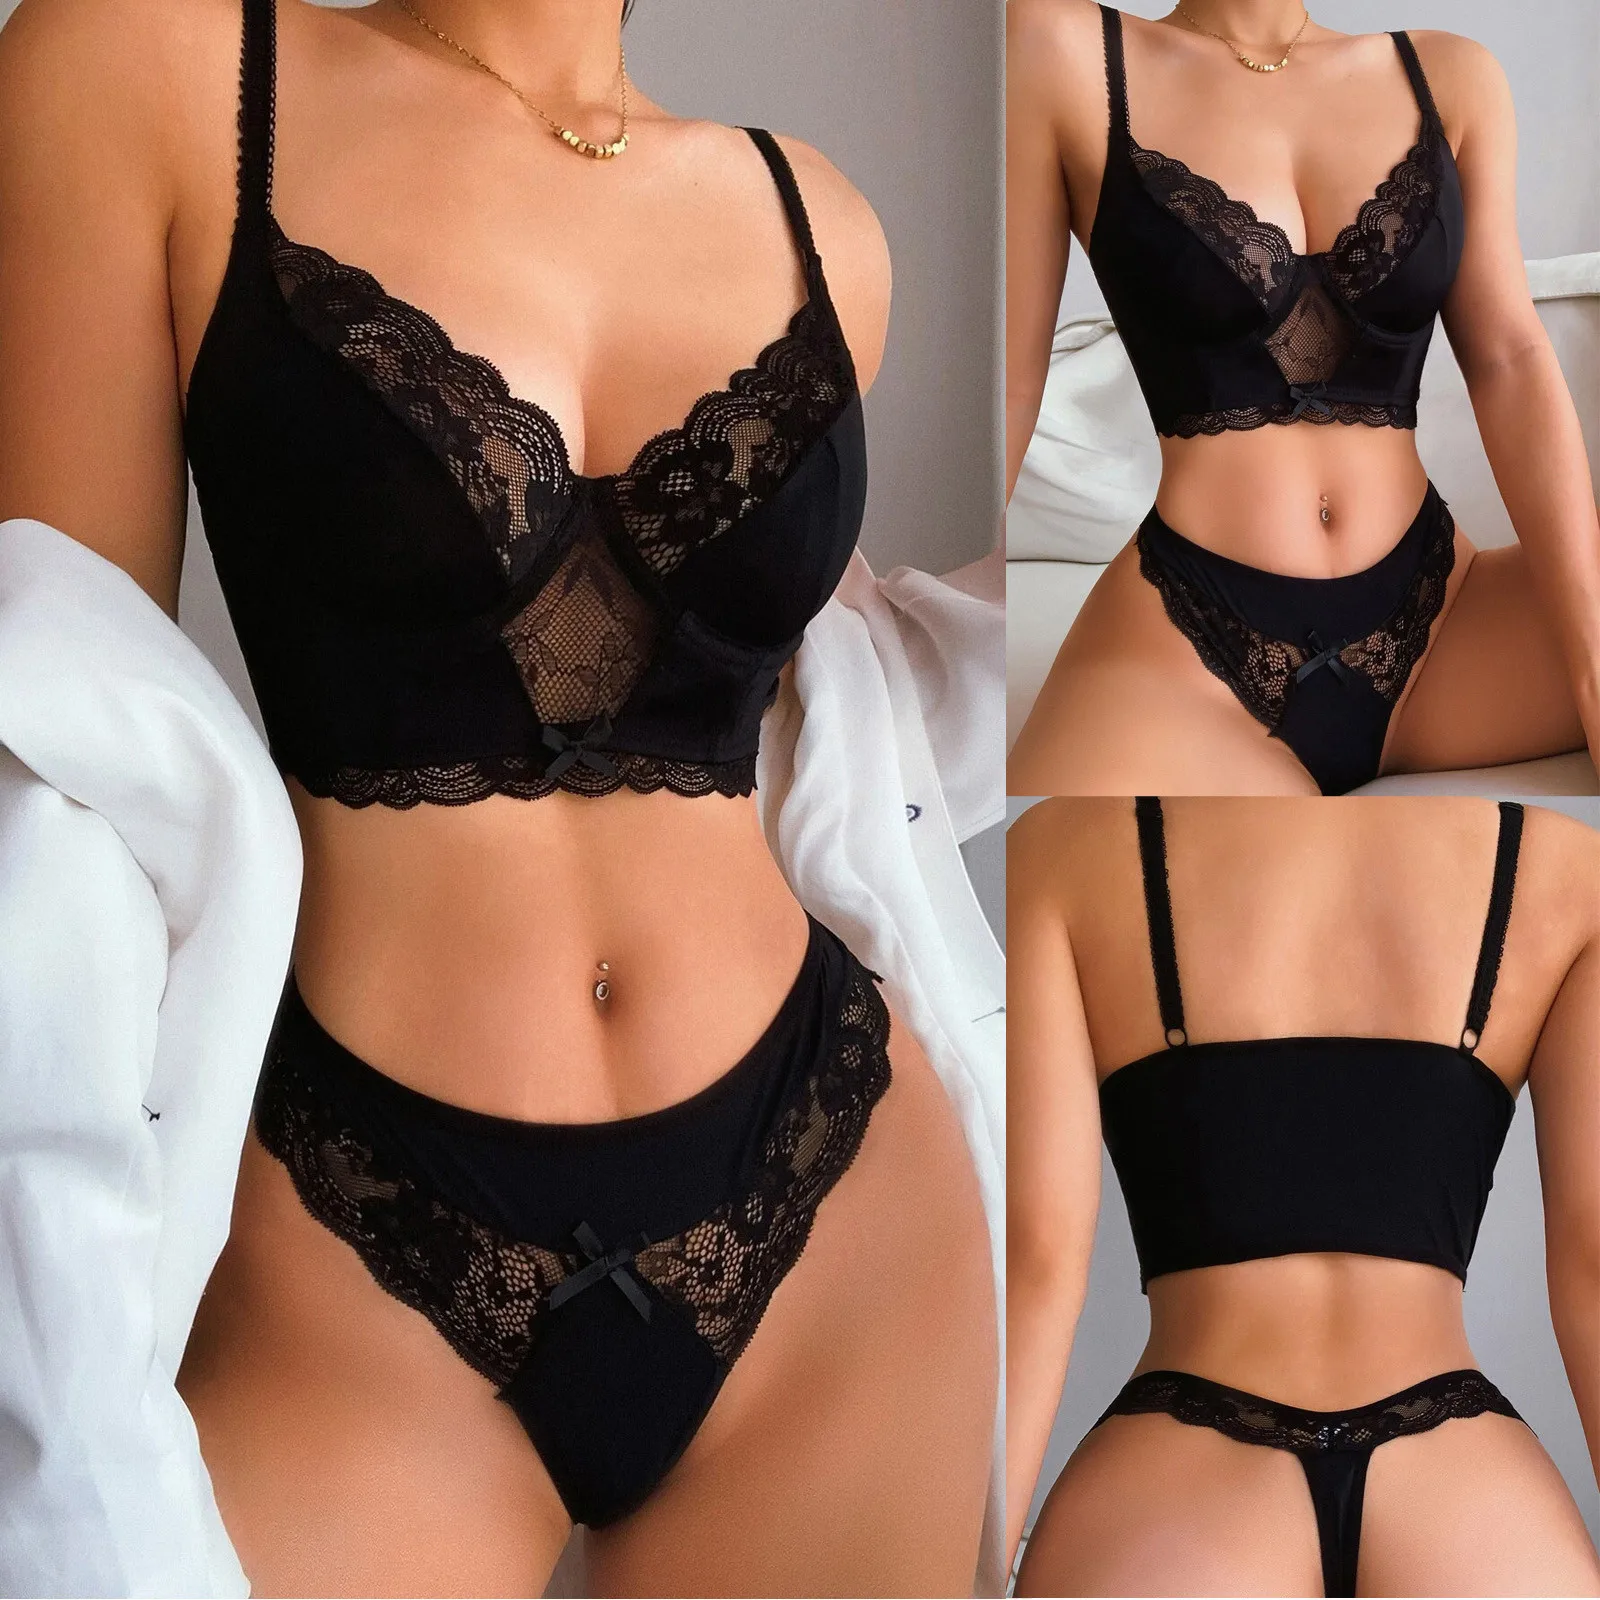 Ruffle Lace Lingerie Sexy Exotic Set Women's Underwear Transparent Short Skin Care Kits Sexy Lace Bra Brief Sets Erotic Intimate black lace underwear set